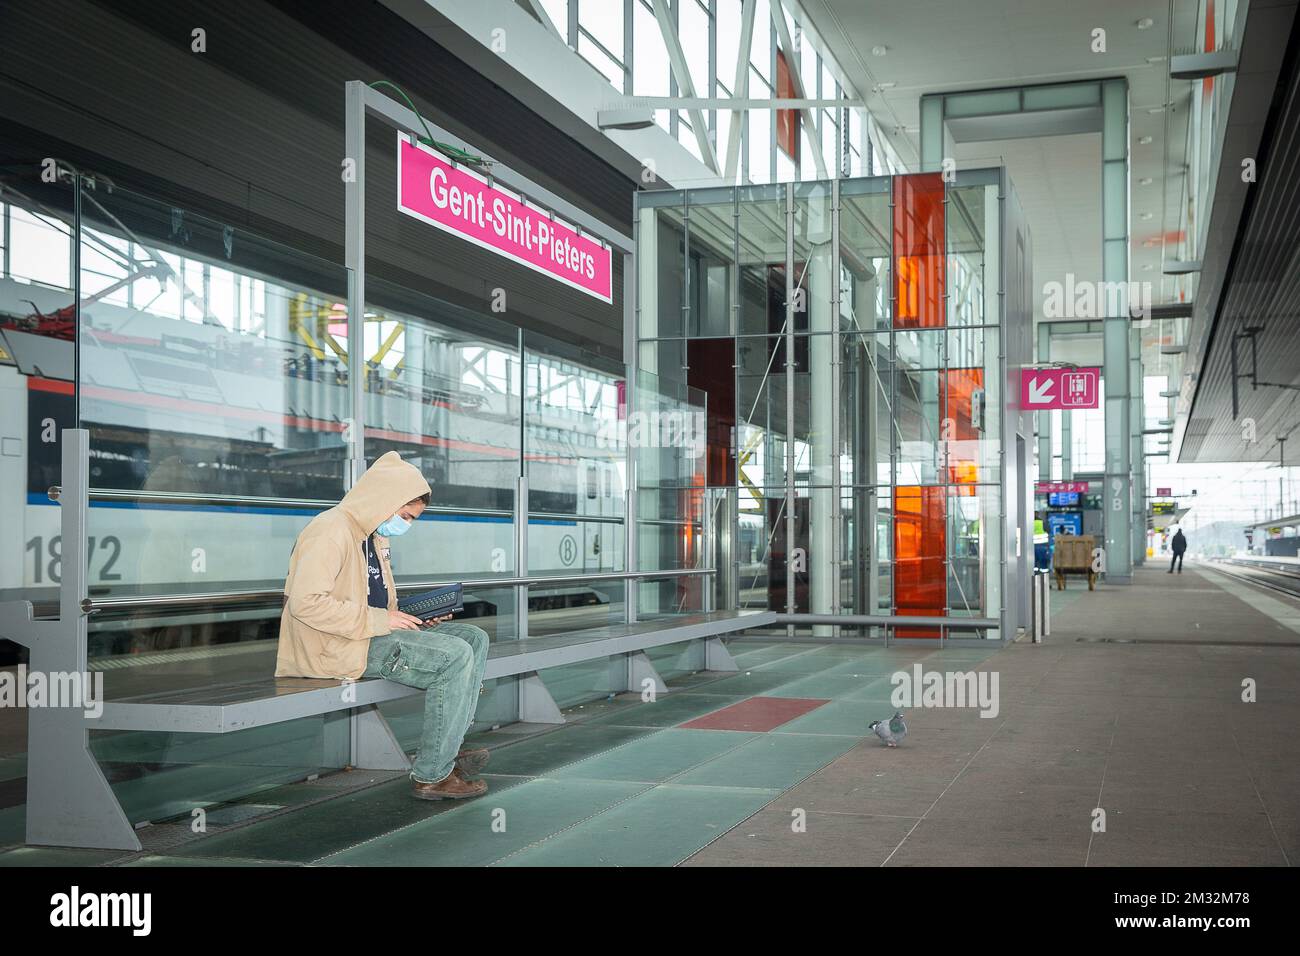 Illustration picture shows a traveller wearing a mouth mask as he waits for  a train, at Gent Sint-Pieters railway station, Monday 04 May 2020. From  today on, wearing a mask that covers